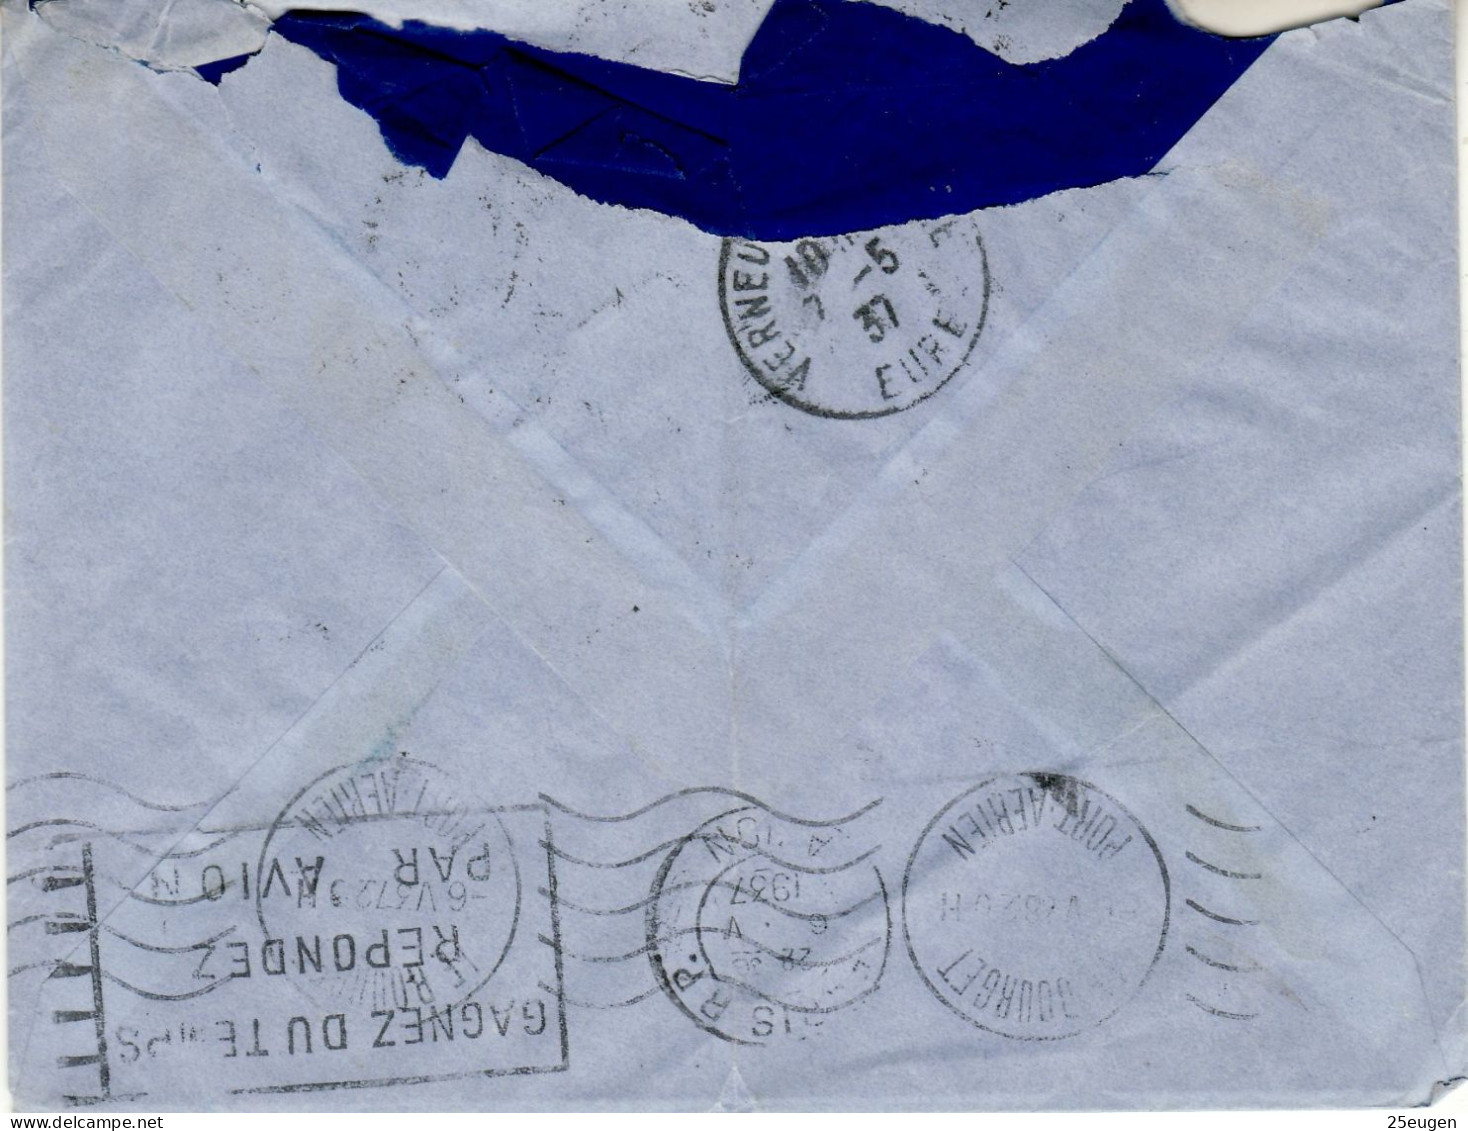 BRAZIL 1937  AIRMAIL LETTER SENT TO VERNEUIL - Covers & Documents